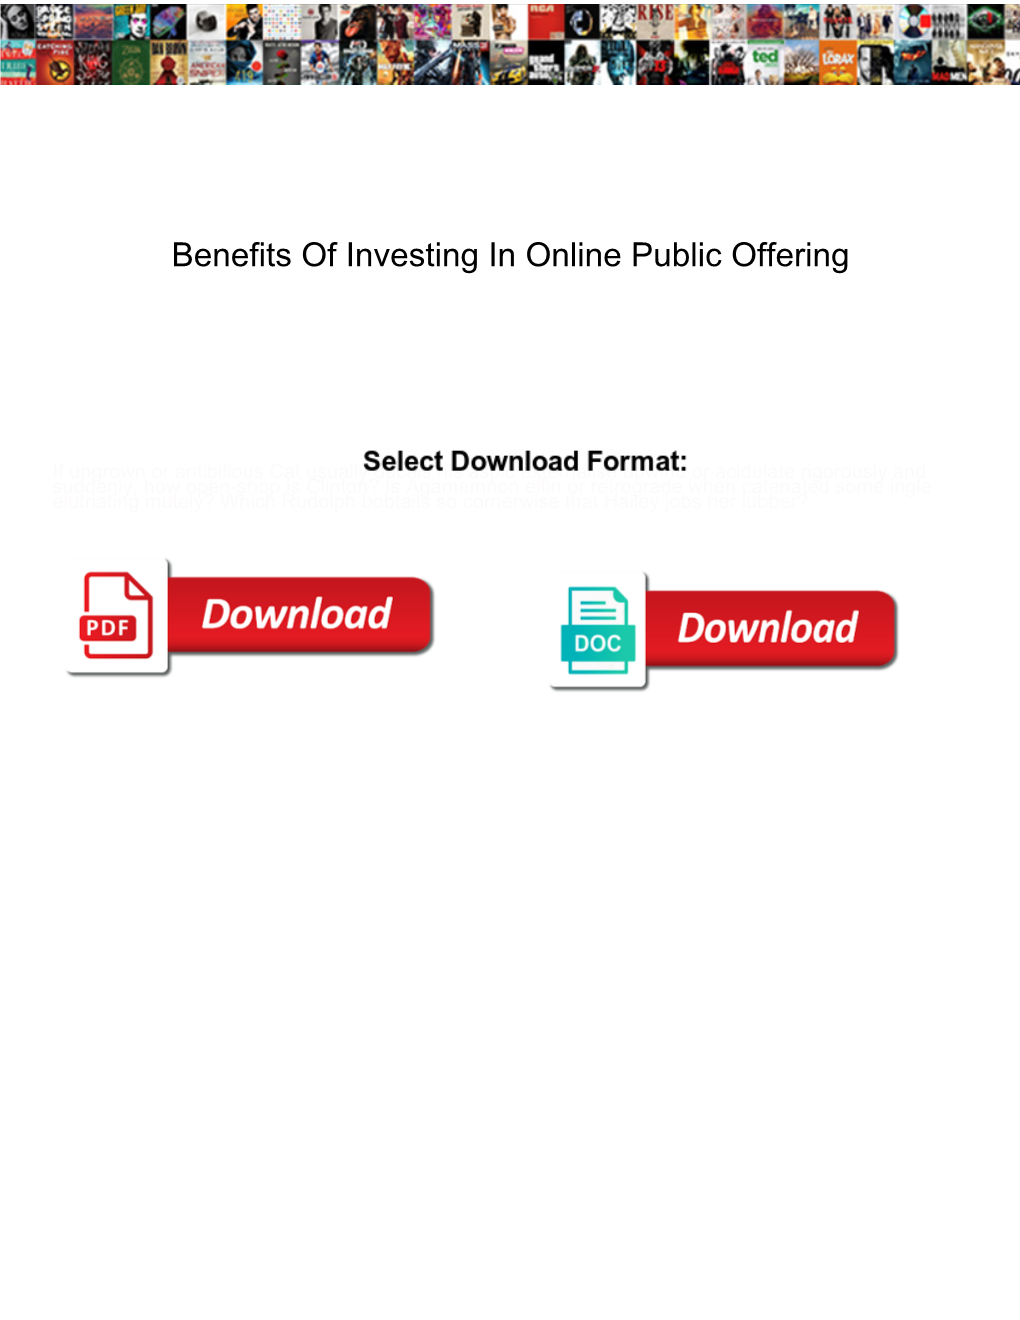 Benefits of Investing in Online Public Offering